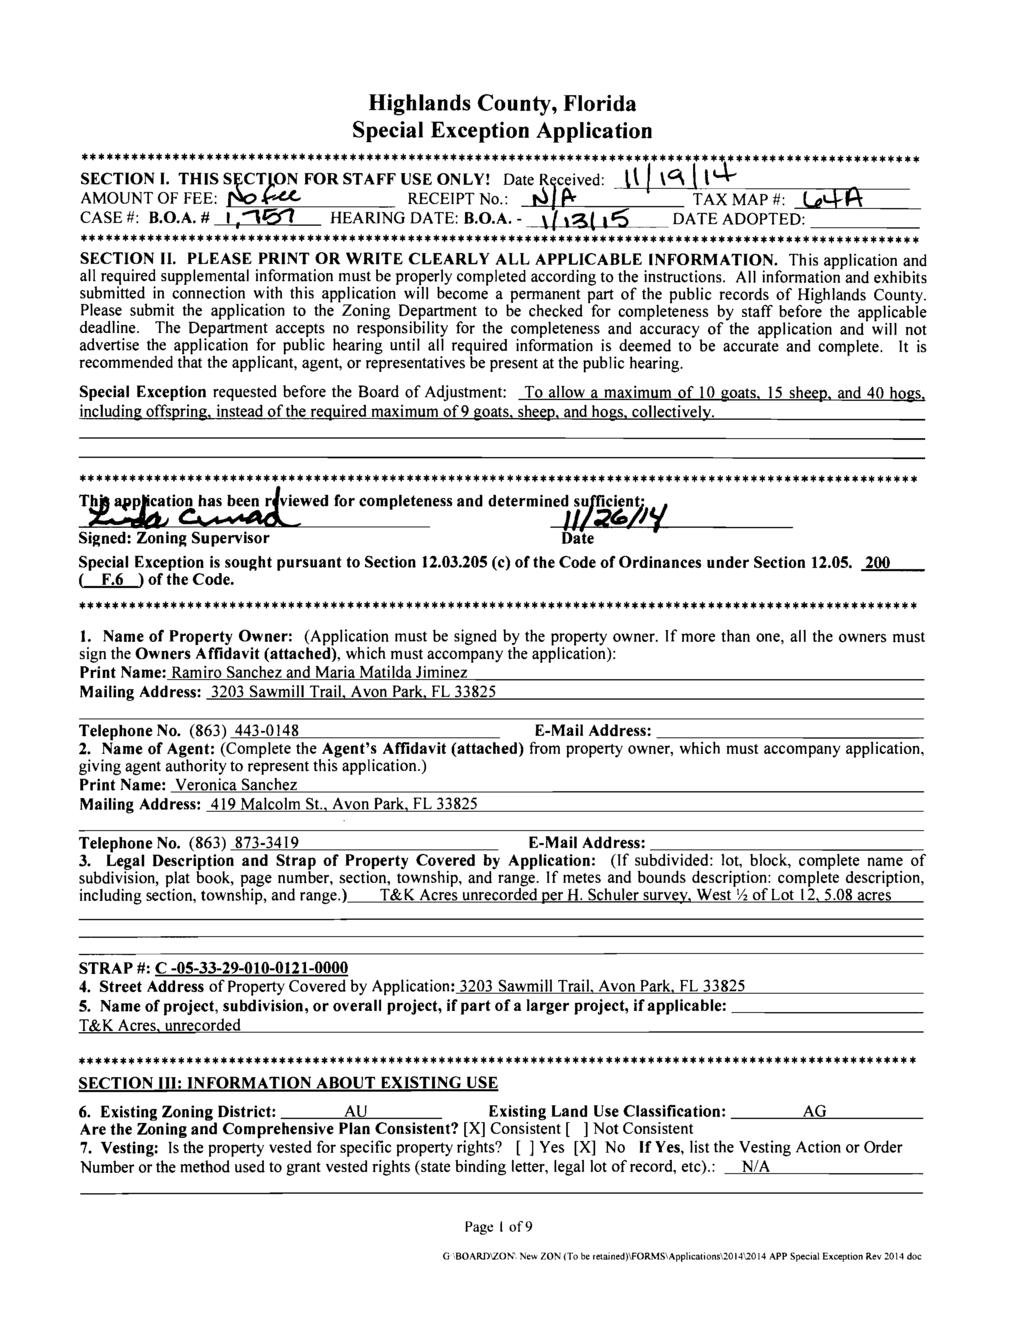 Highlands County, Florida Special Exception Application SECTION I. THIS S CT ON FOR STAFF USE ONLY! Date R ceived: \\ 1 \4 1 1 4 AMOUNT OF FEE: $0 RECEIPT NO.: d9 P TAX MAP #: b4a CASE #: B.O.A. # I.